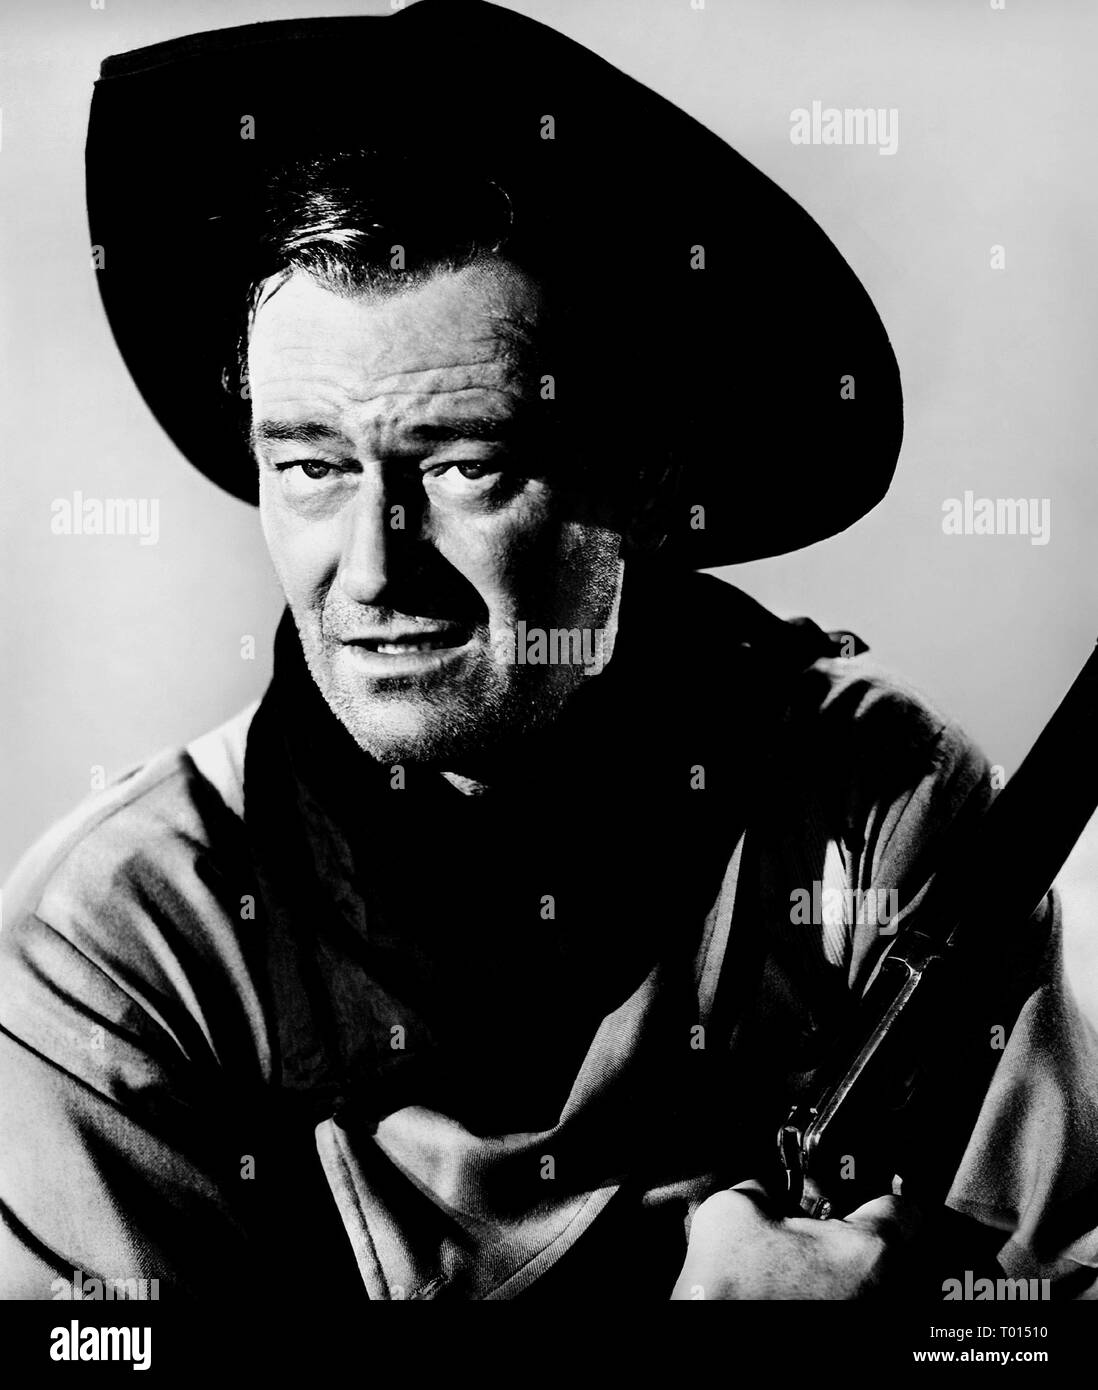 John Wayne Searchers High Resolution Stock Photography and Images - Alamy